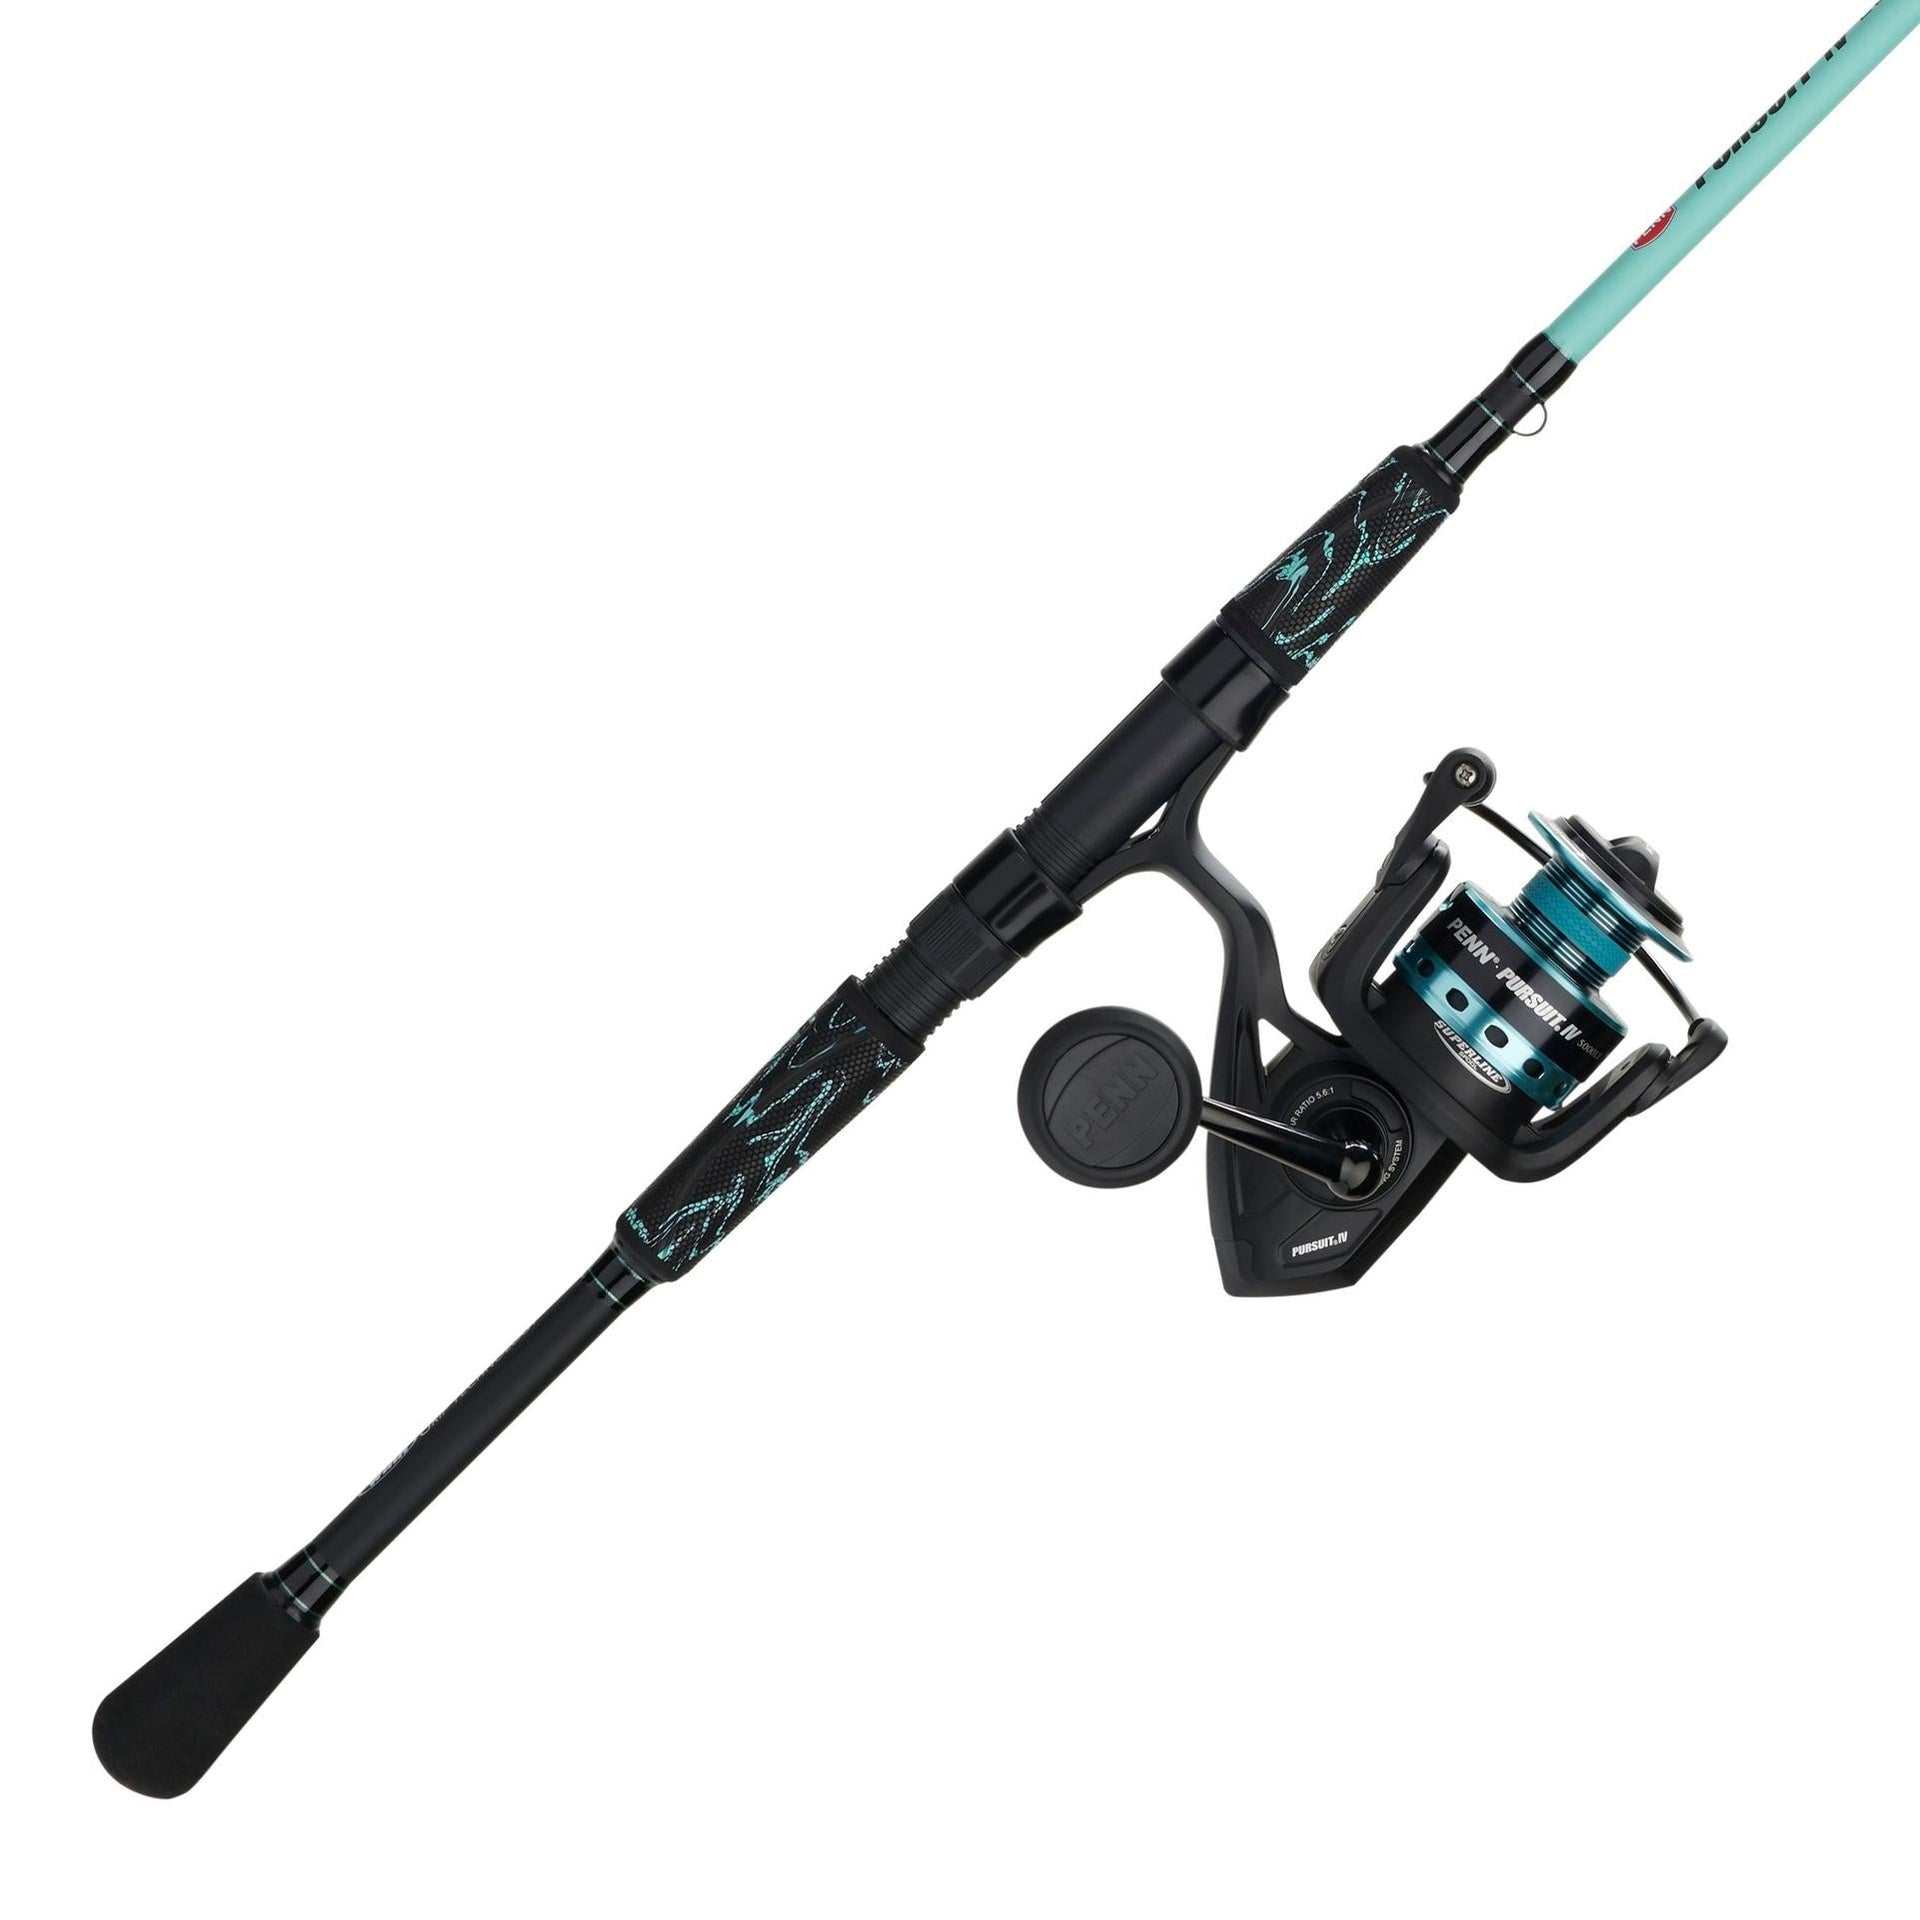 8 Best Surf Fishing Rod and Reel Combos